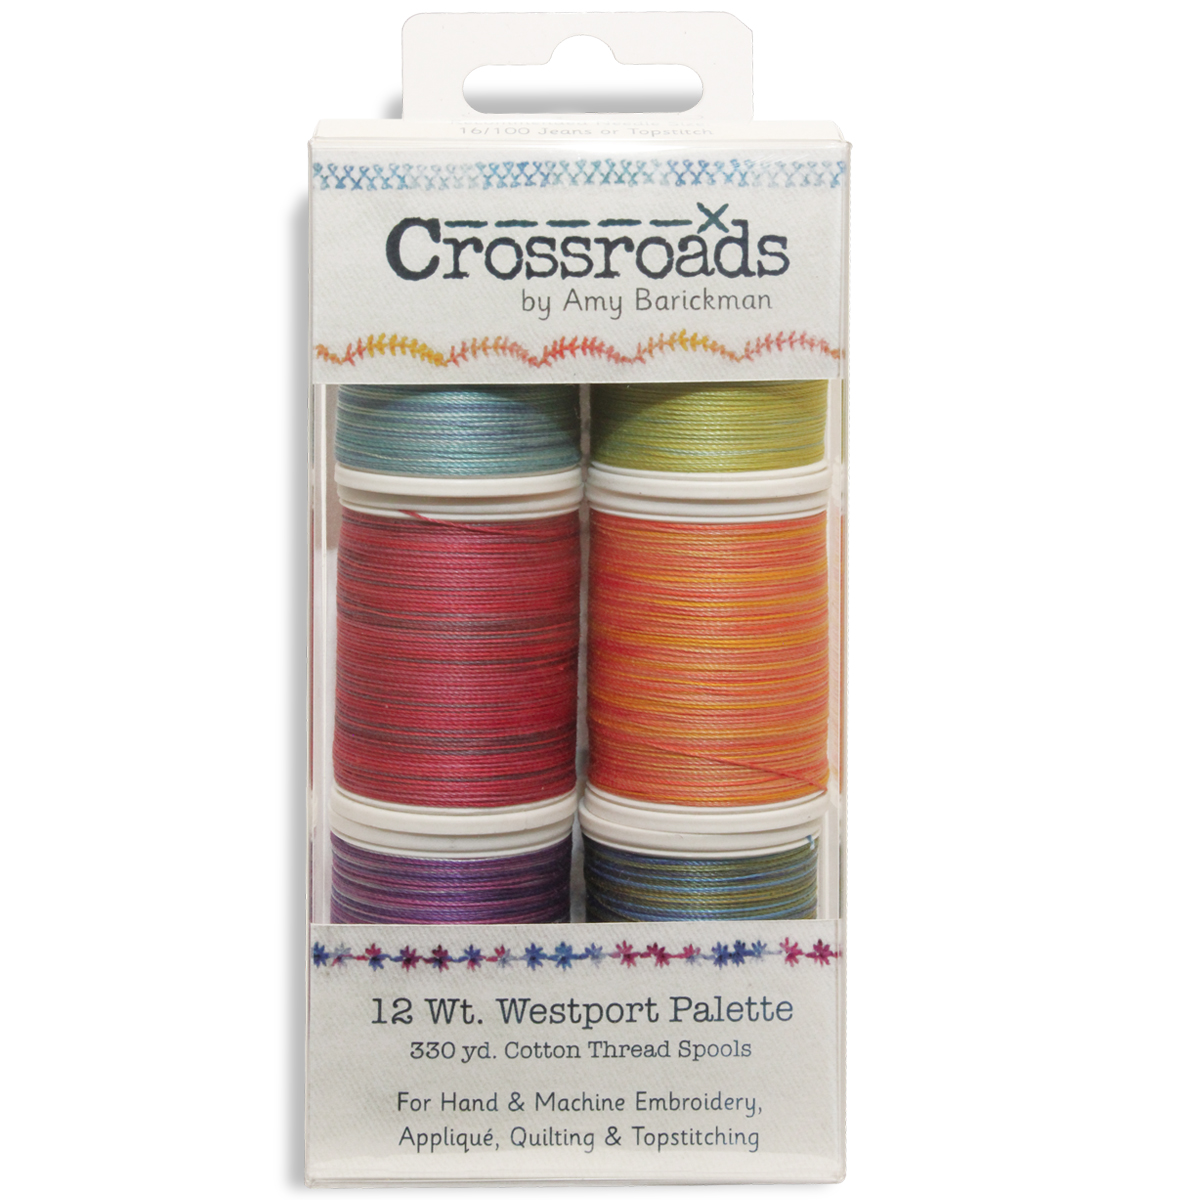 Crossroads By Amy Barickman - Westport Sampler - 12 Wt. Cotton Blendables Thread - 300 yd. Spools Questions & Answers